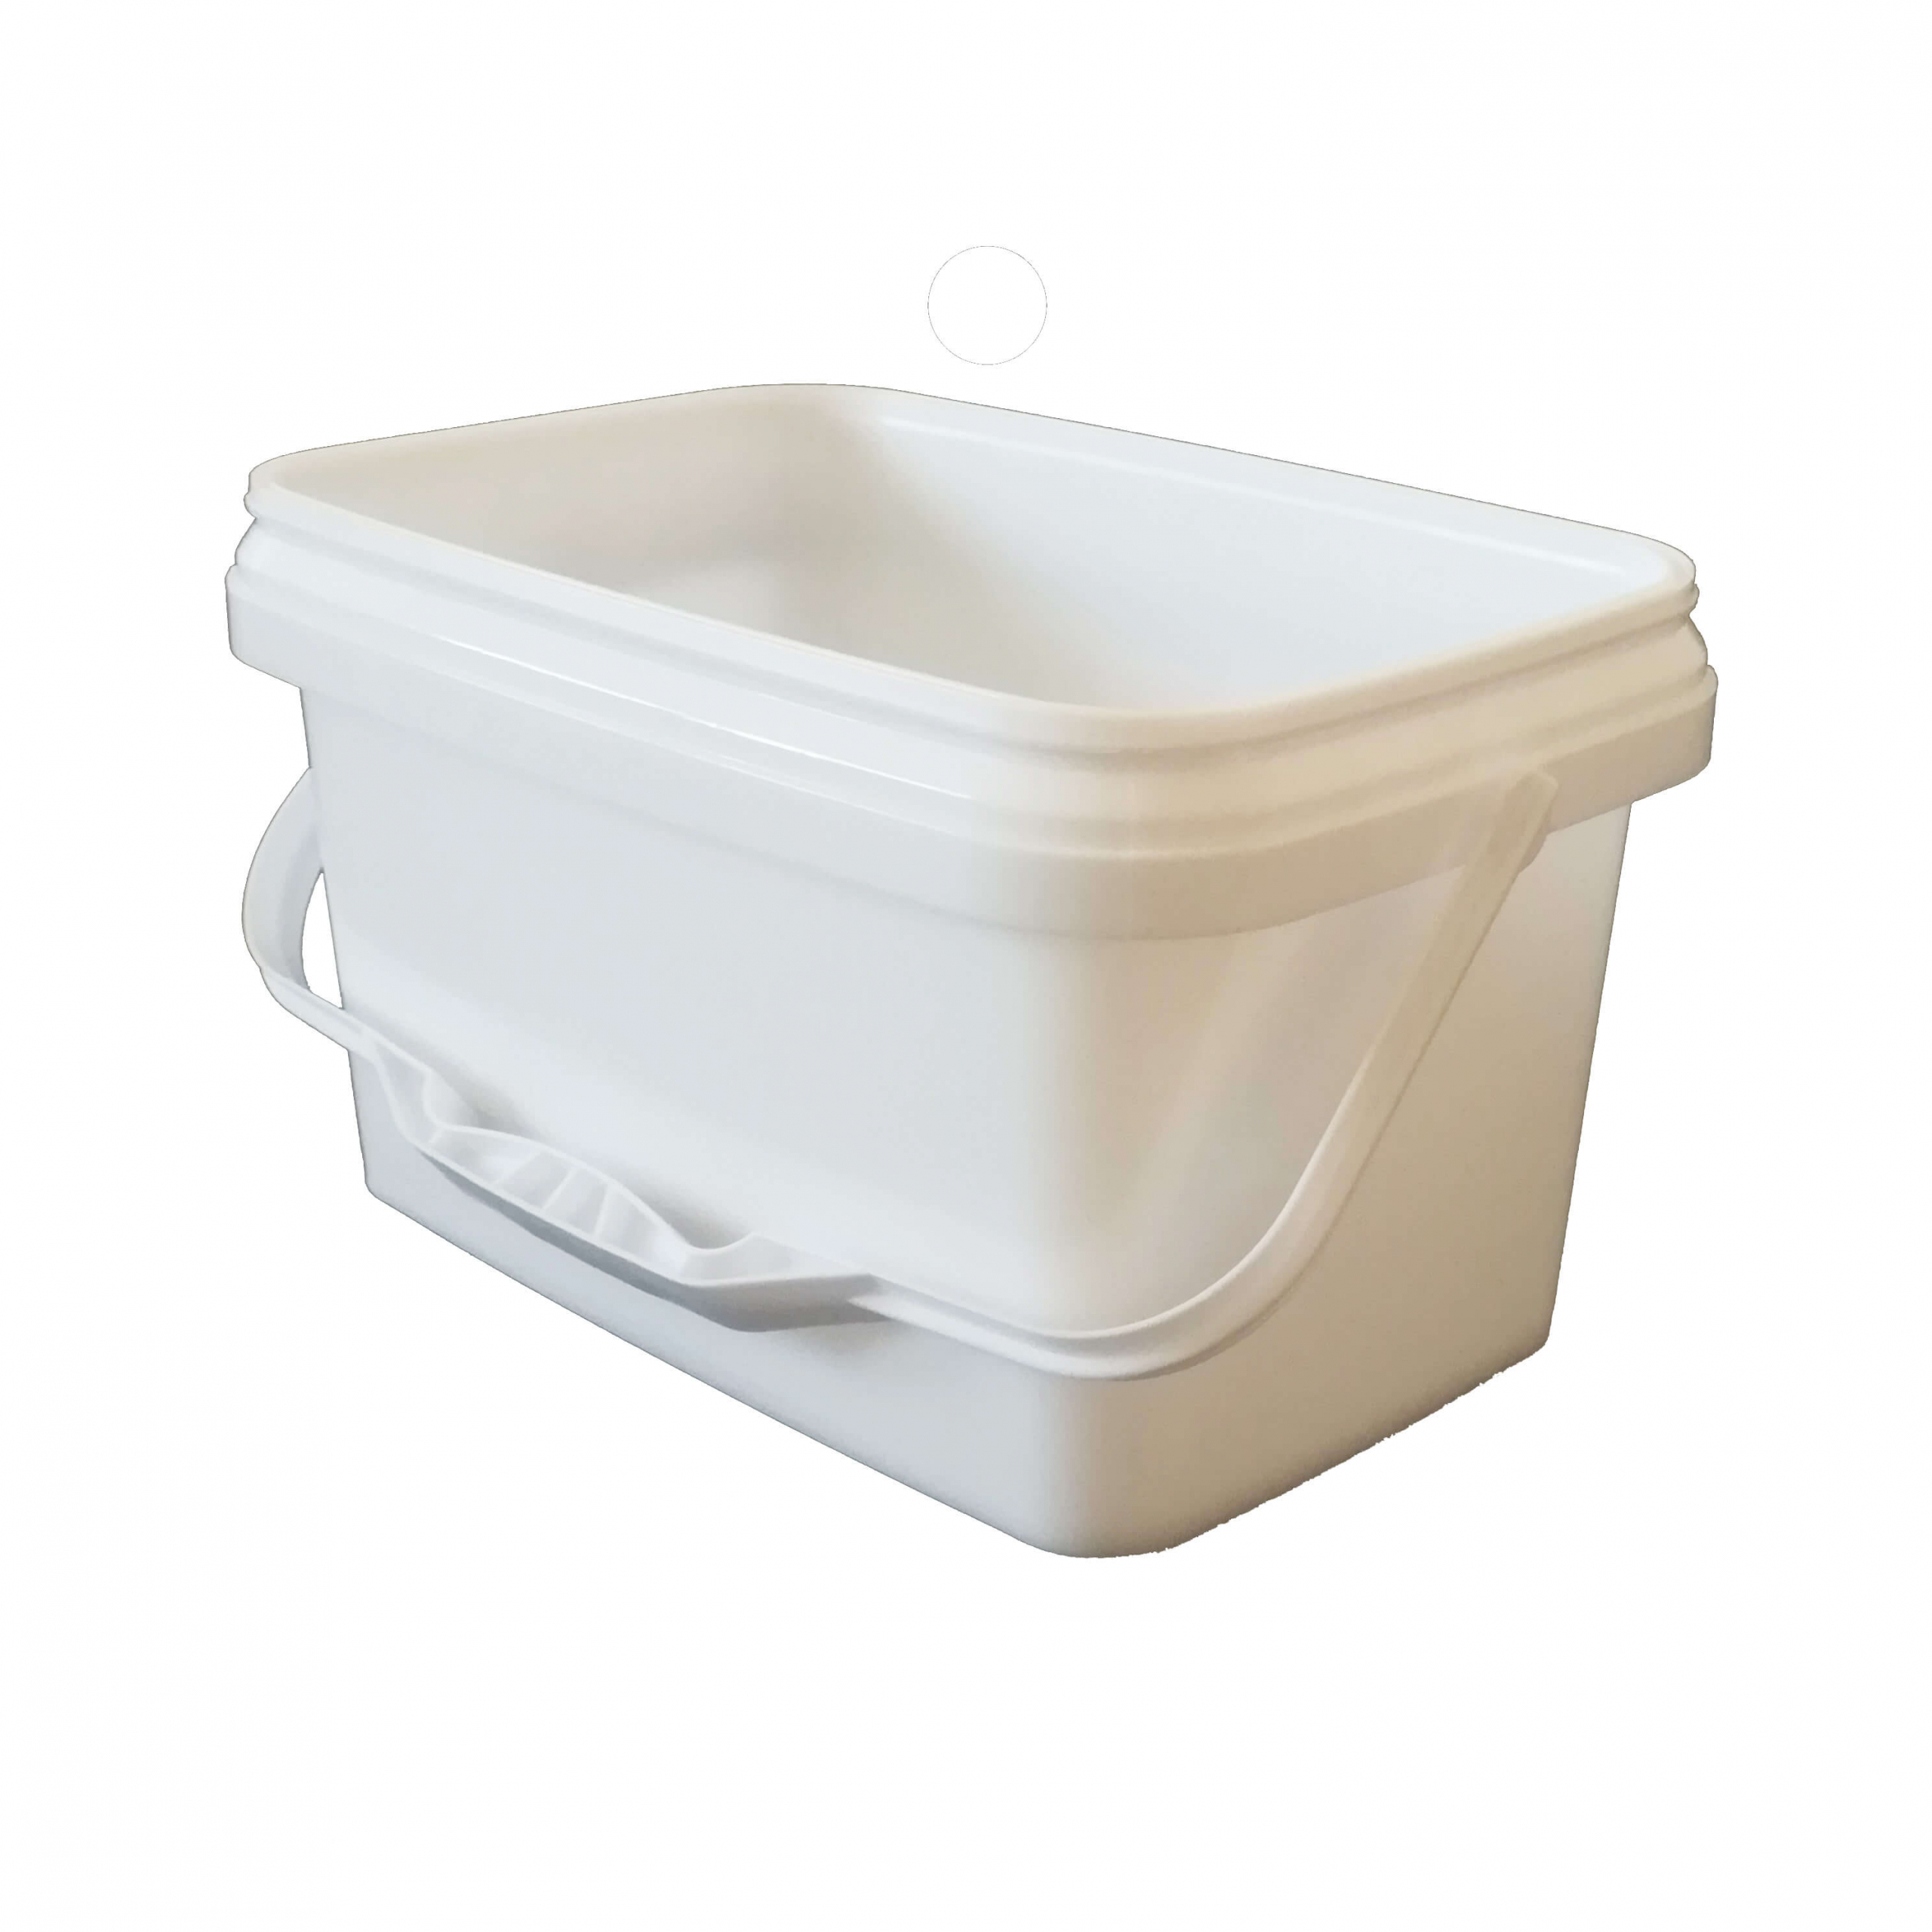 SQUARE PLASTIC BUCKETS WITH LIDS - Qiming Packaging Lids Caps Bungs,Cans  Pails Buckets Baskets Trays